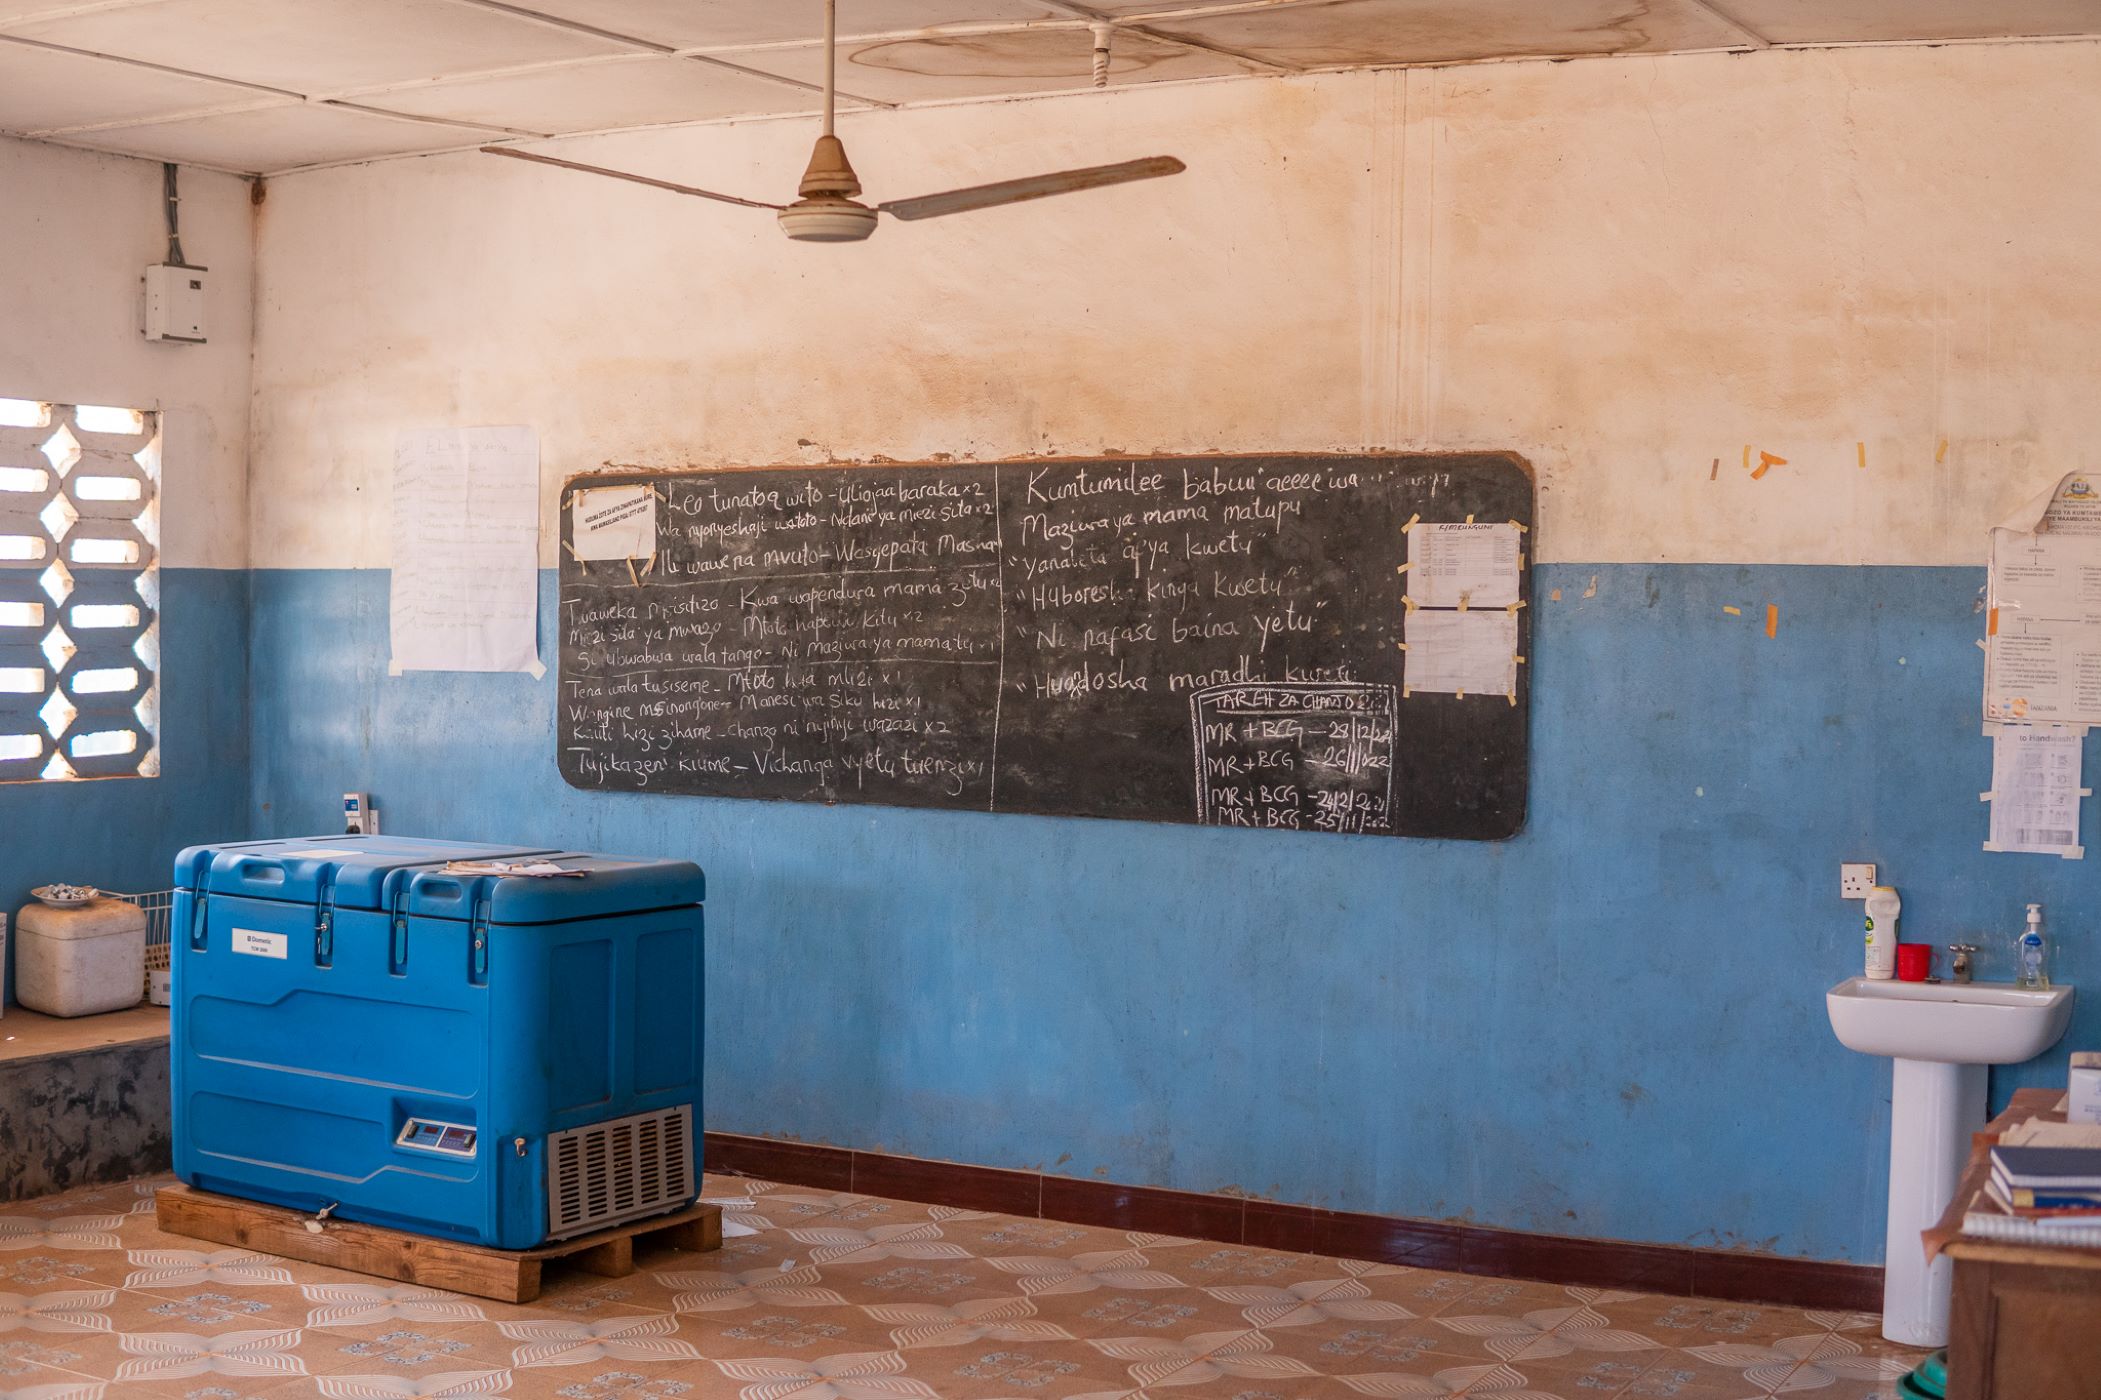 building interior painted half white and half blue in tanzania, chalk board on the wall